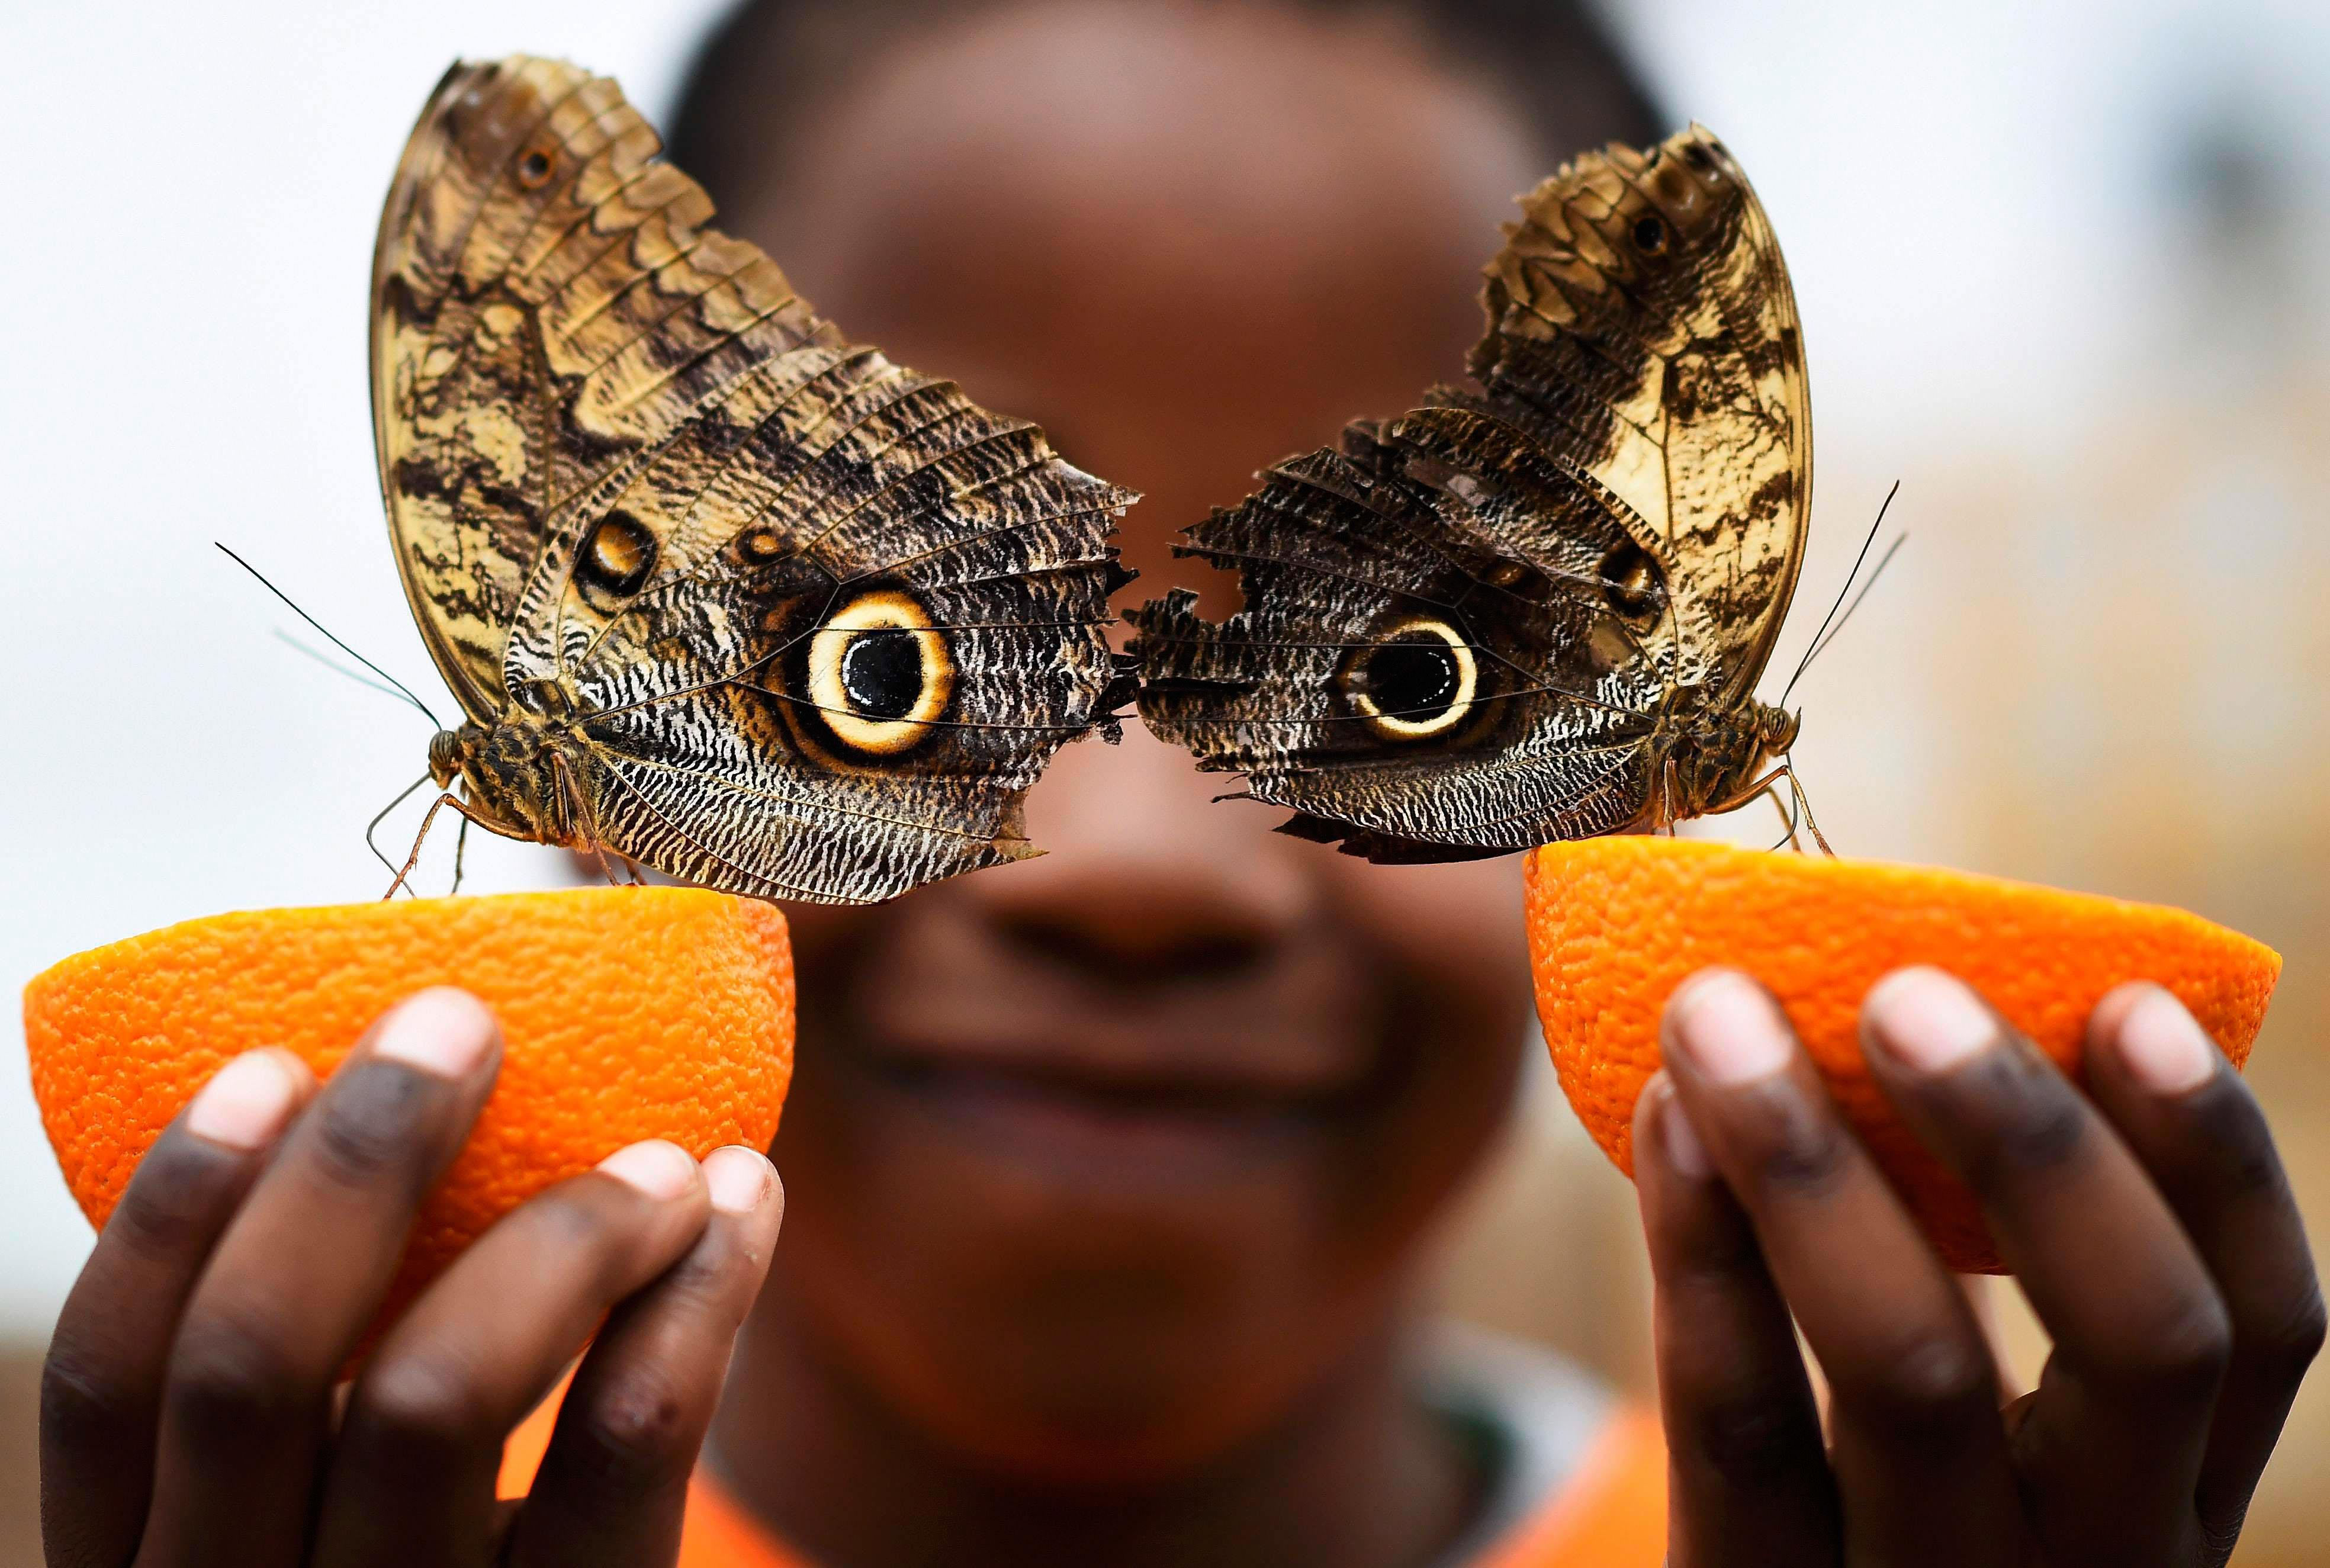 Bjorn, aged 5, smiles as he poses with a Owl butterfly during an event to launch the Sensational But